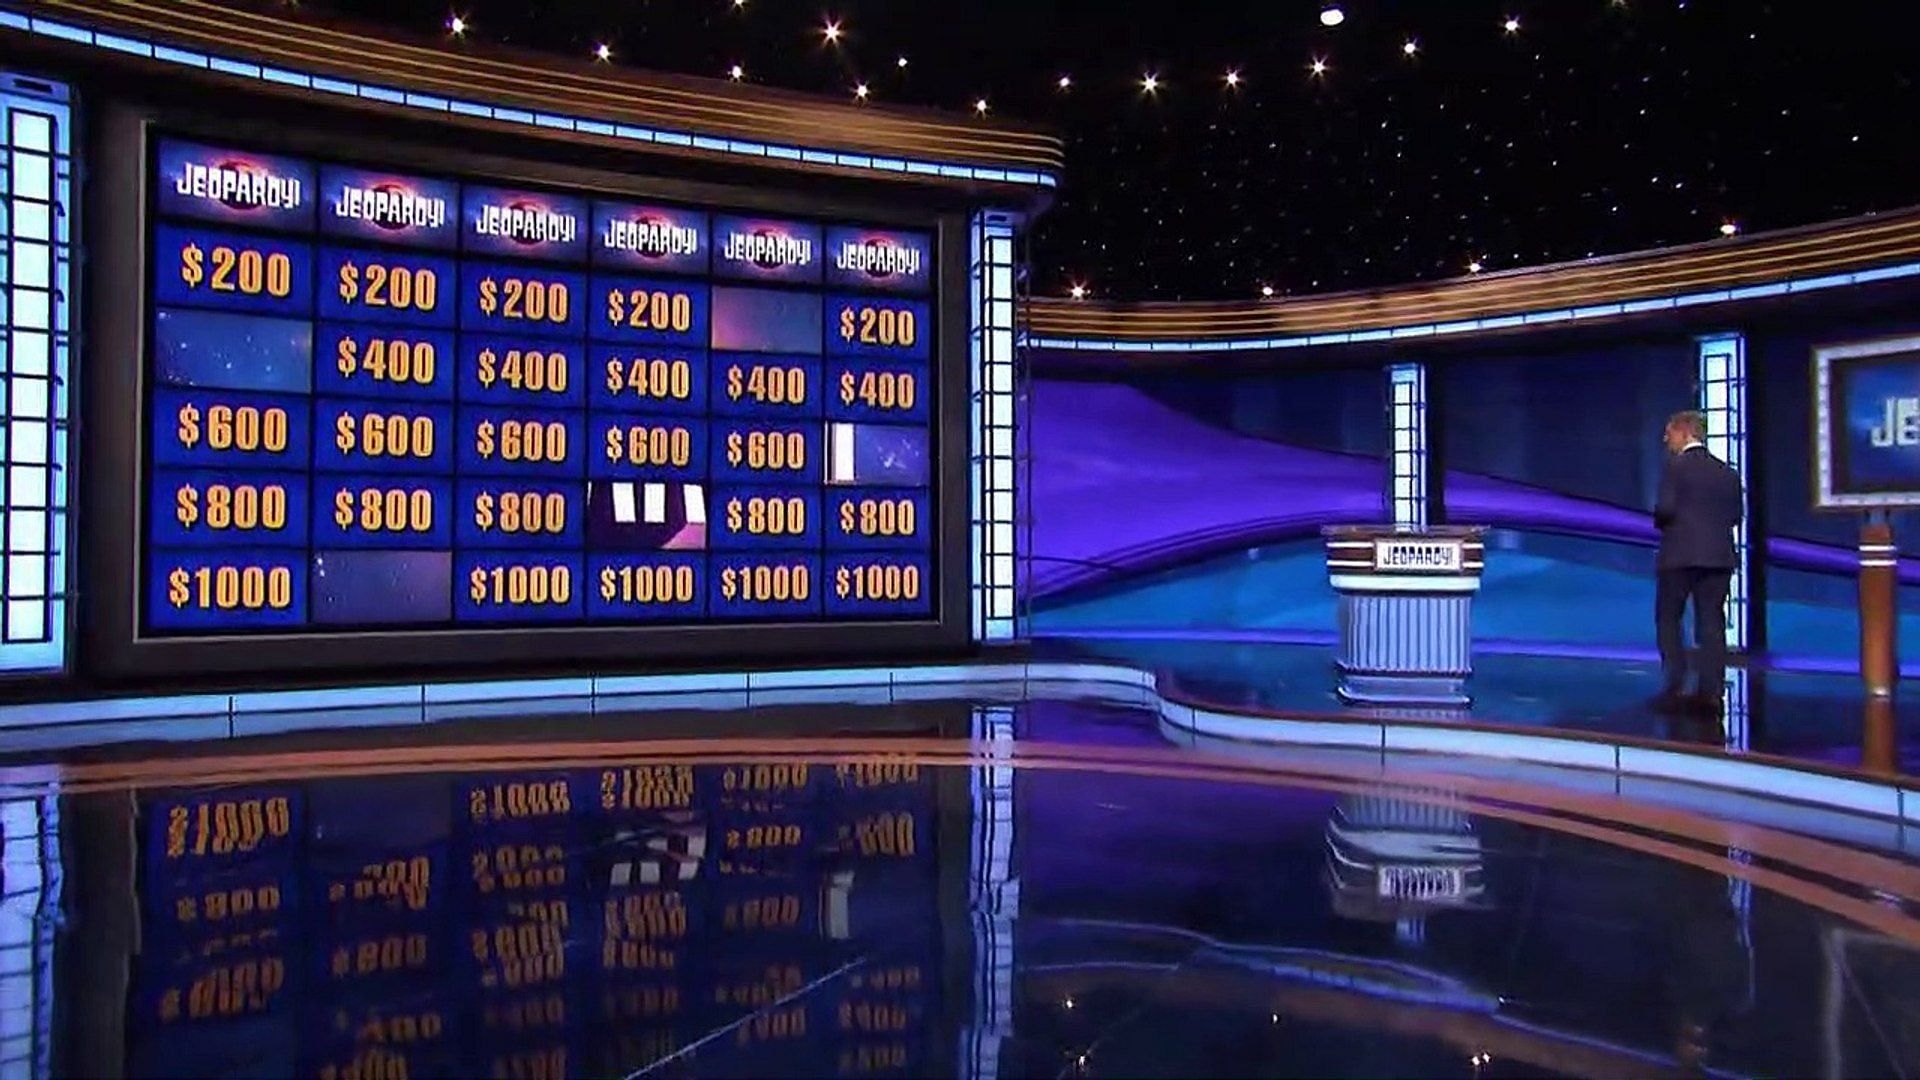 Today's Final Jeopardy! question, answer & contestants July 11, 2022